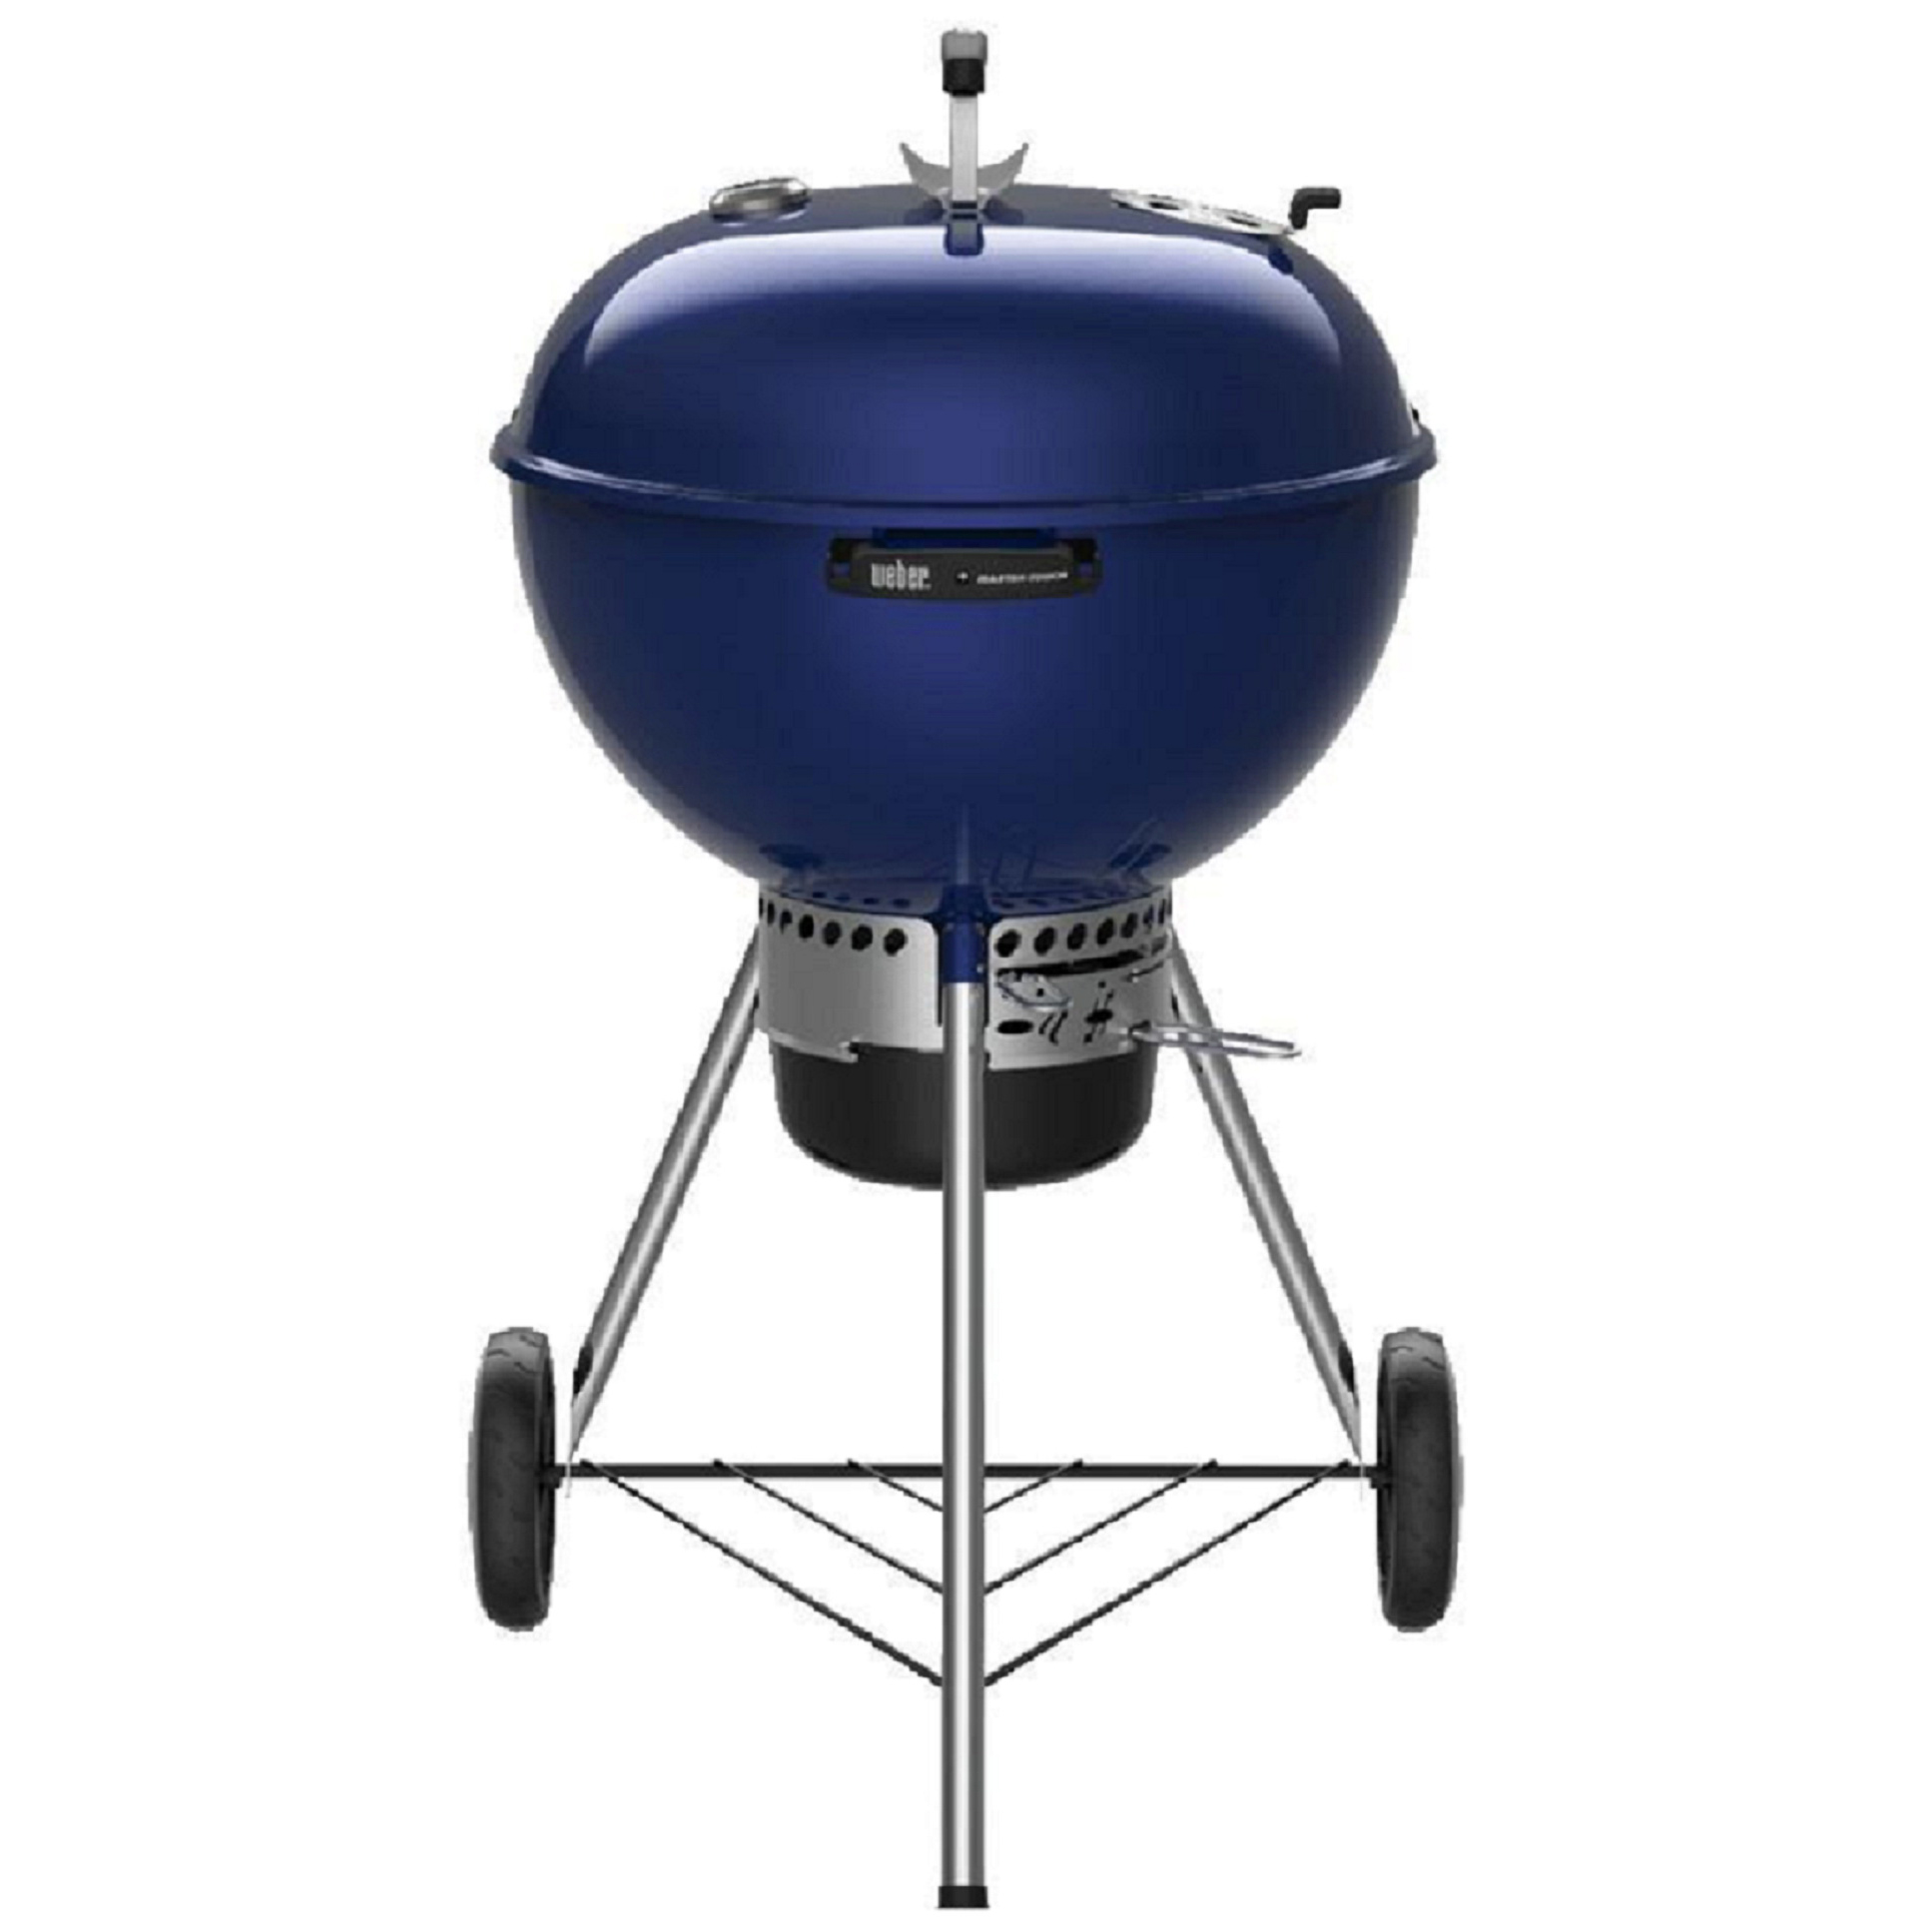 Weber Master-Touch 14516001 Charcoal Grill, 1-Grate, 363 sq-in Primary Cooking Surface, Deep Ocean Blue